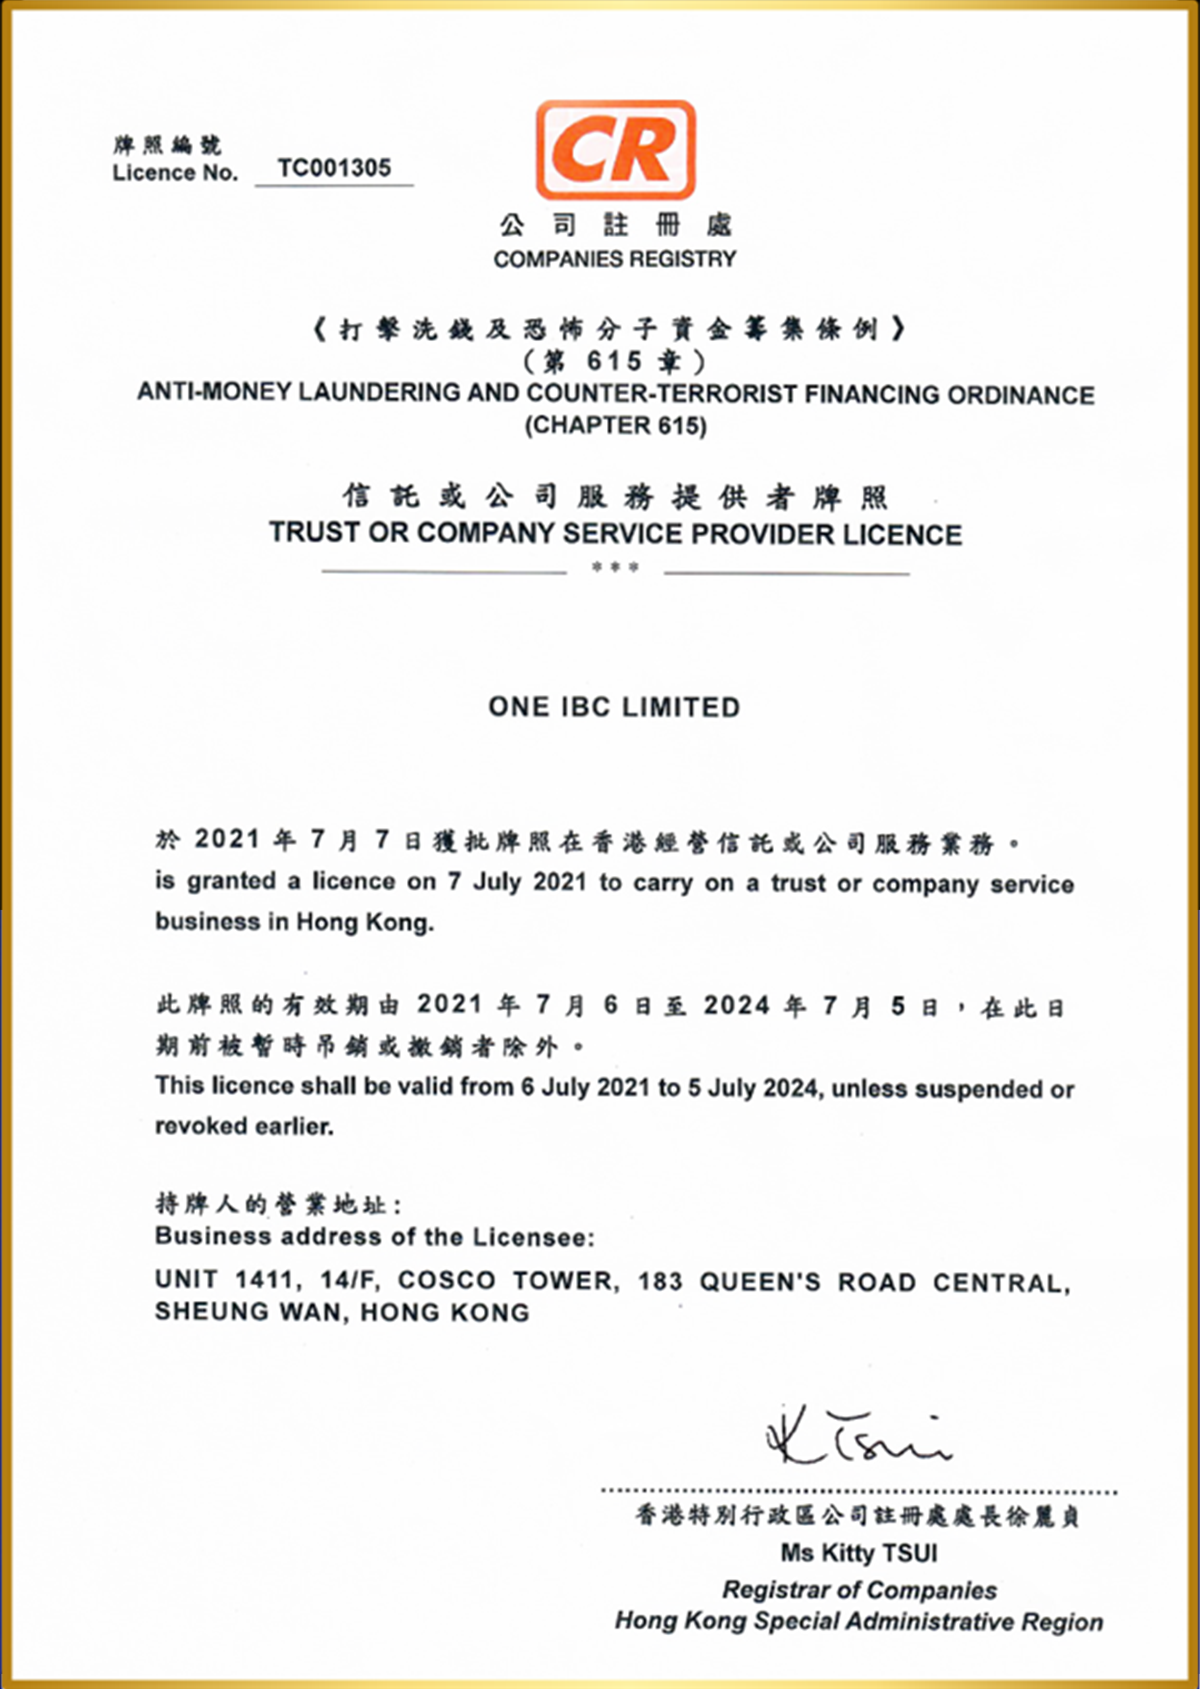 New license issued to One IBC Limited (Operating in Hong Kong) for the provision of Trust or Company Service Provider Licence in Hong Kong (TCSP) 2021 - 2024